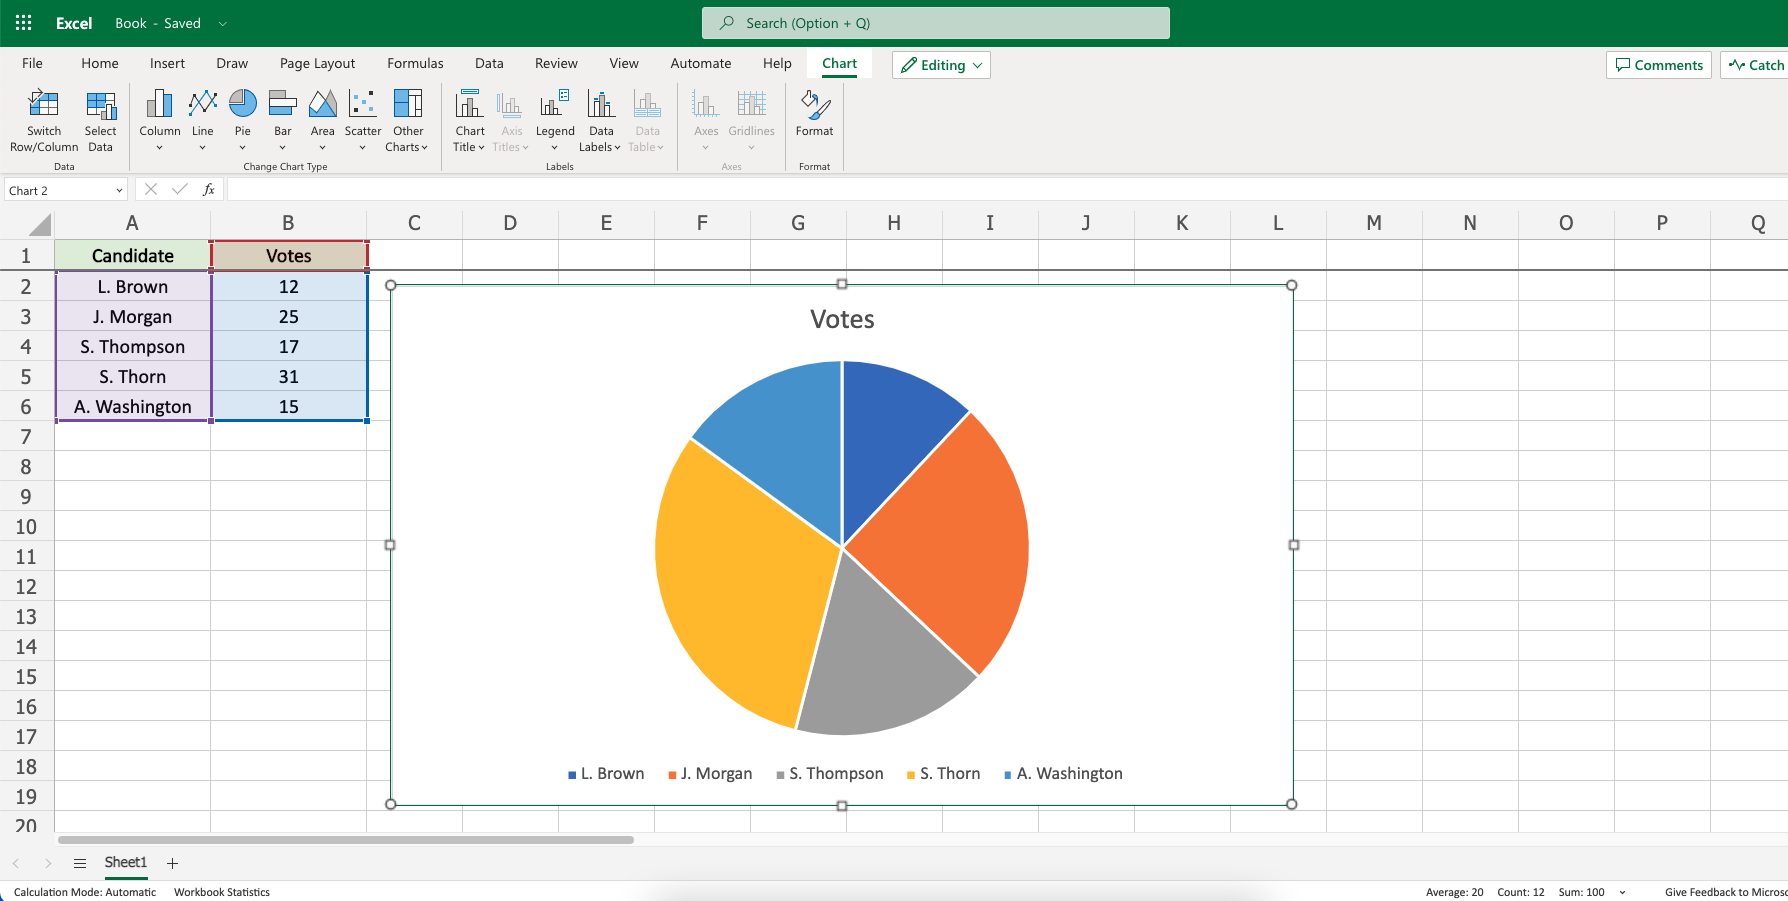 spreadsheets with microsoft excel indeed test answers